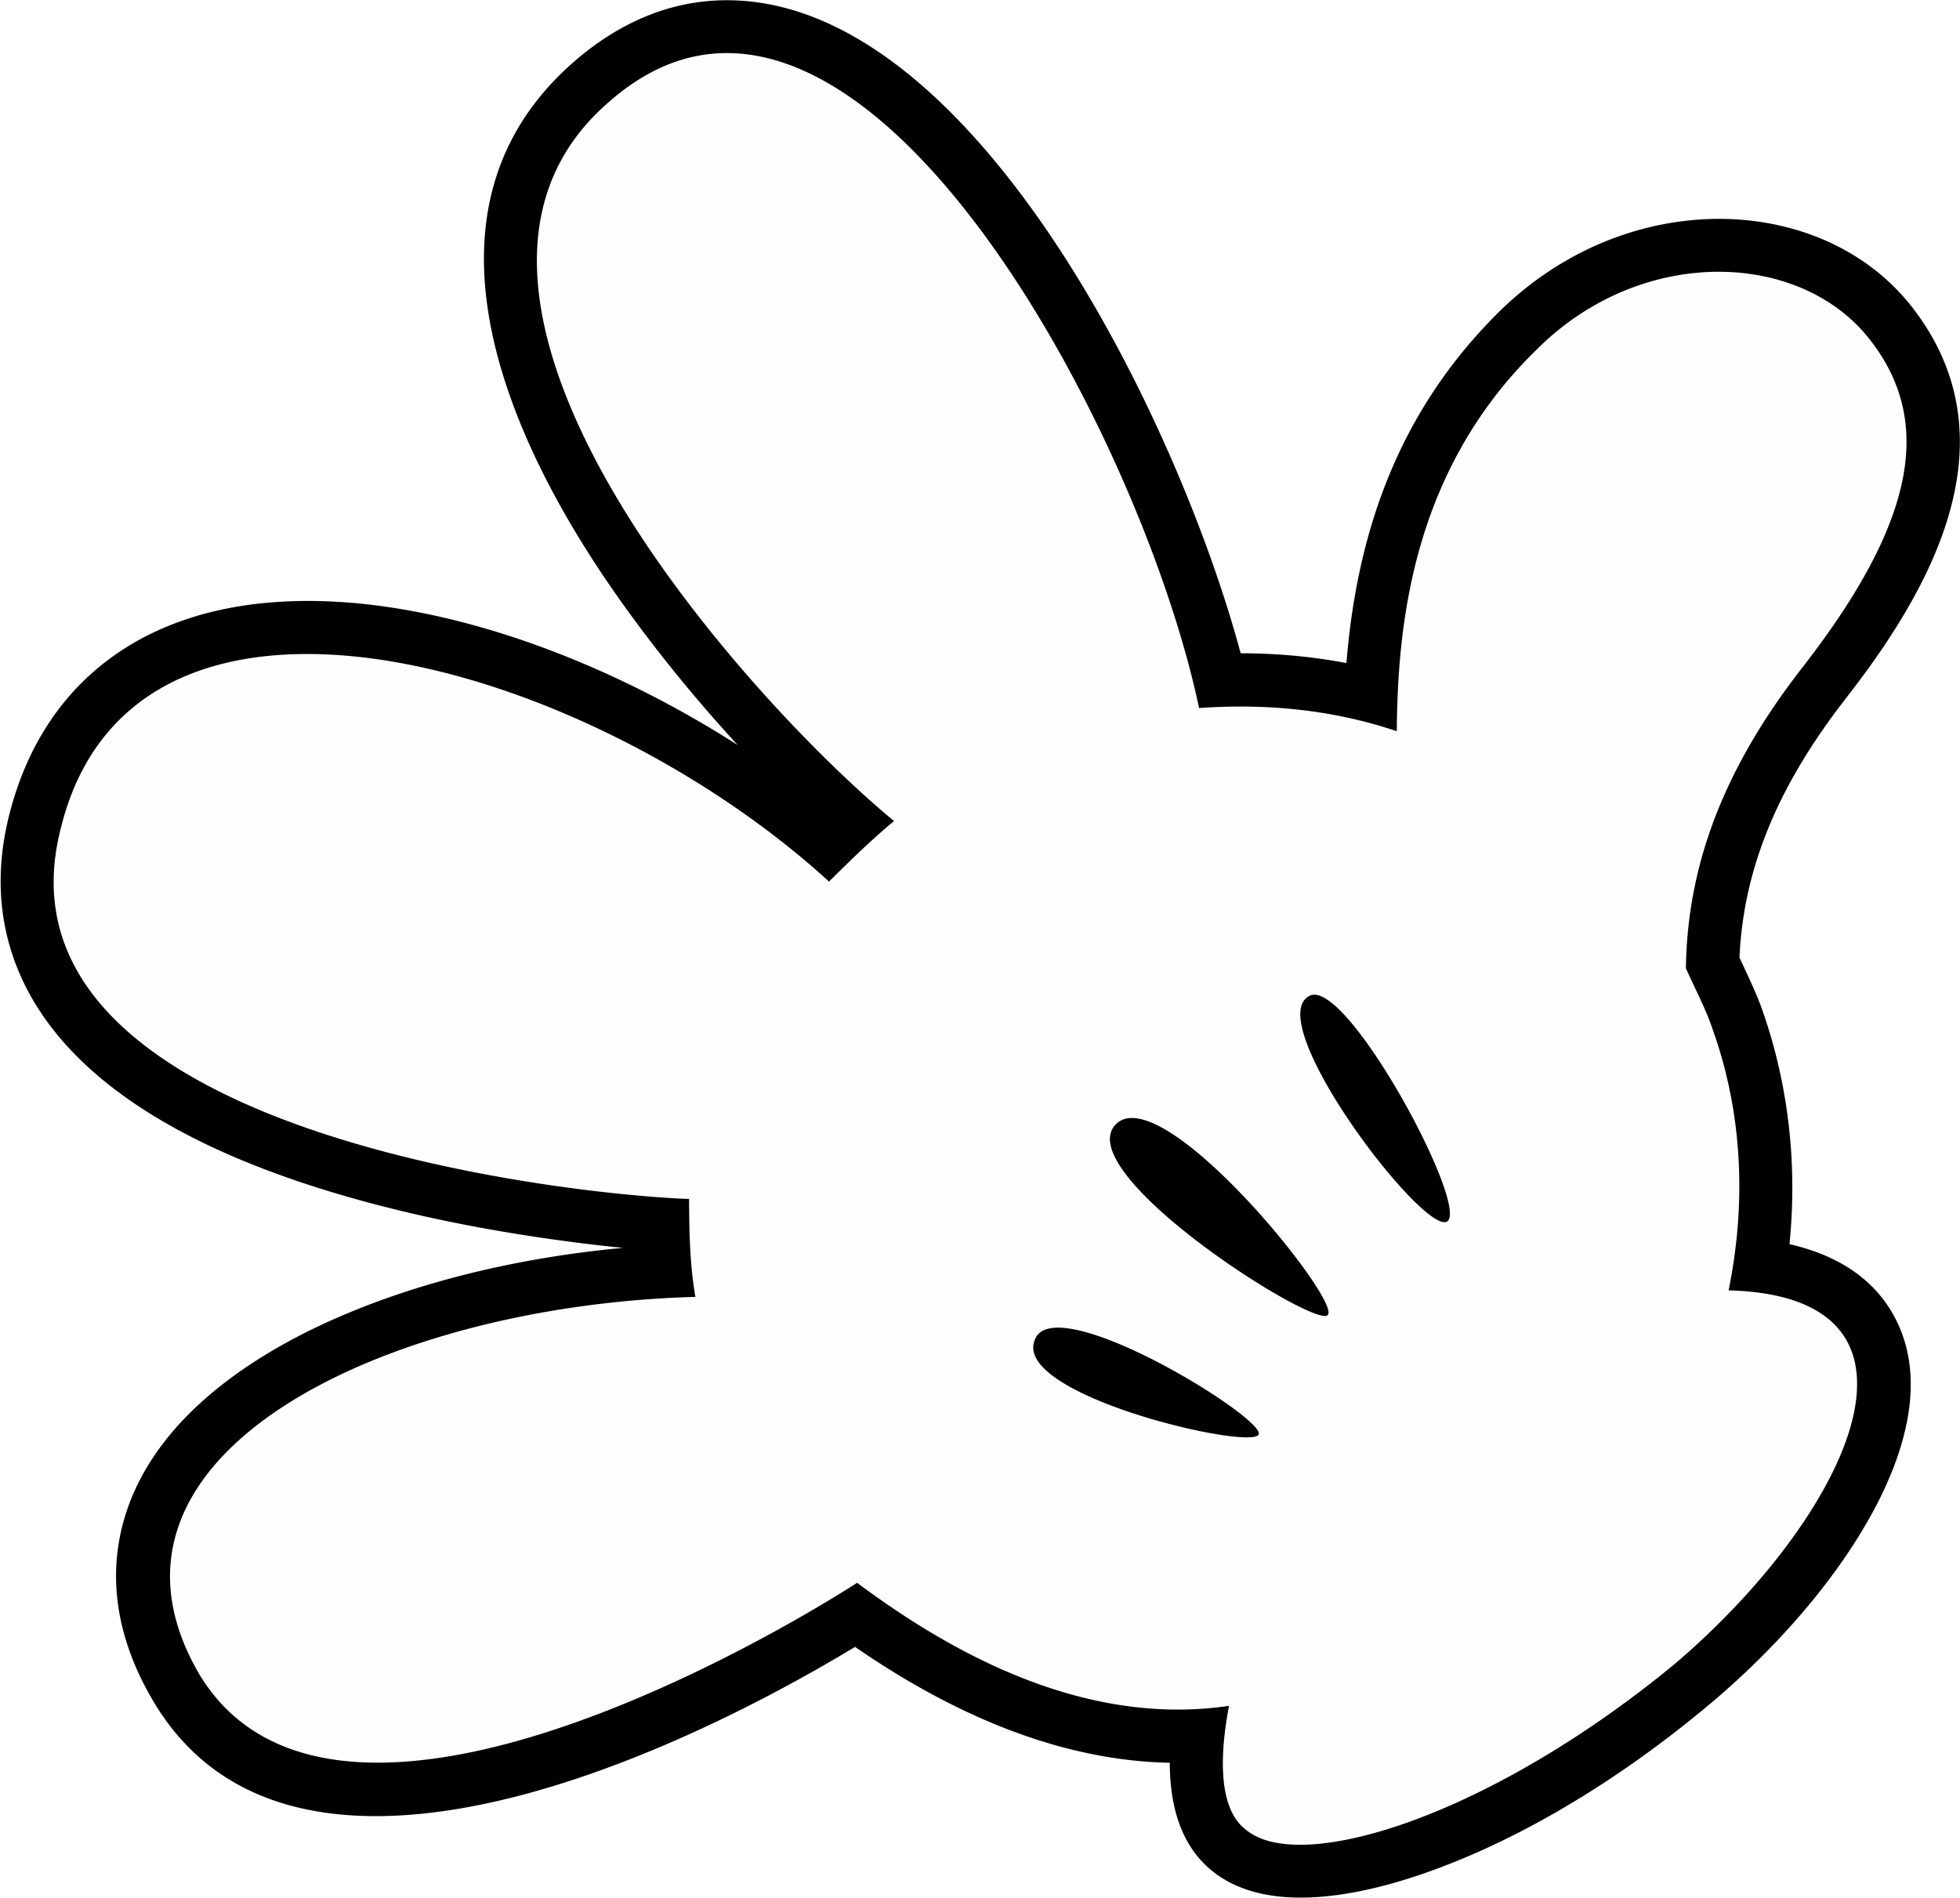 Mickey Hand PNG Image PurePNG Free transparent CC0 PNG Image Library